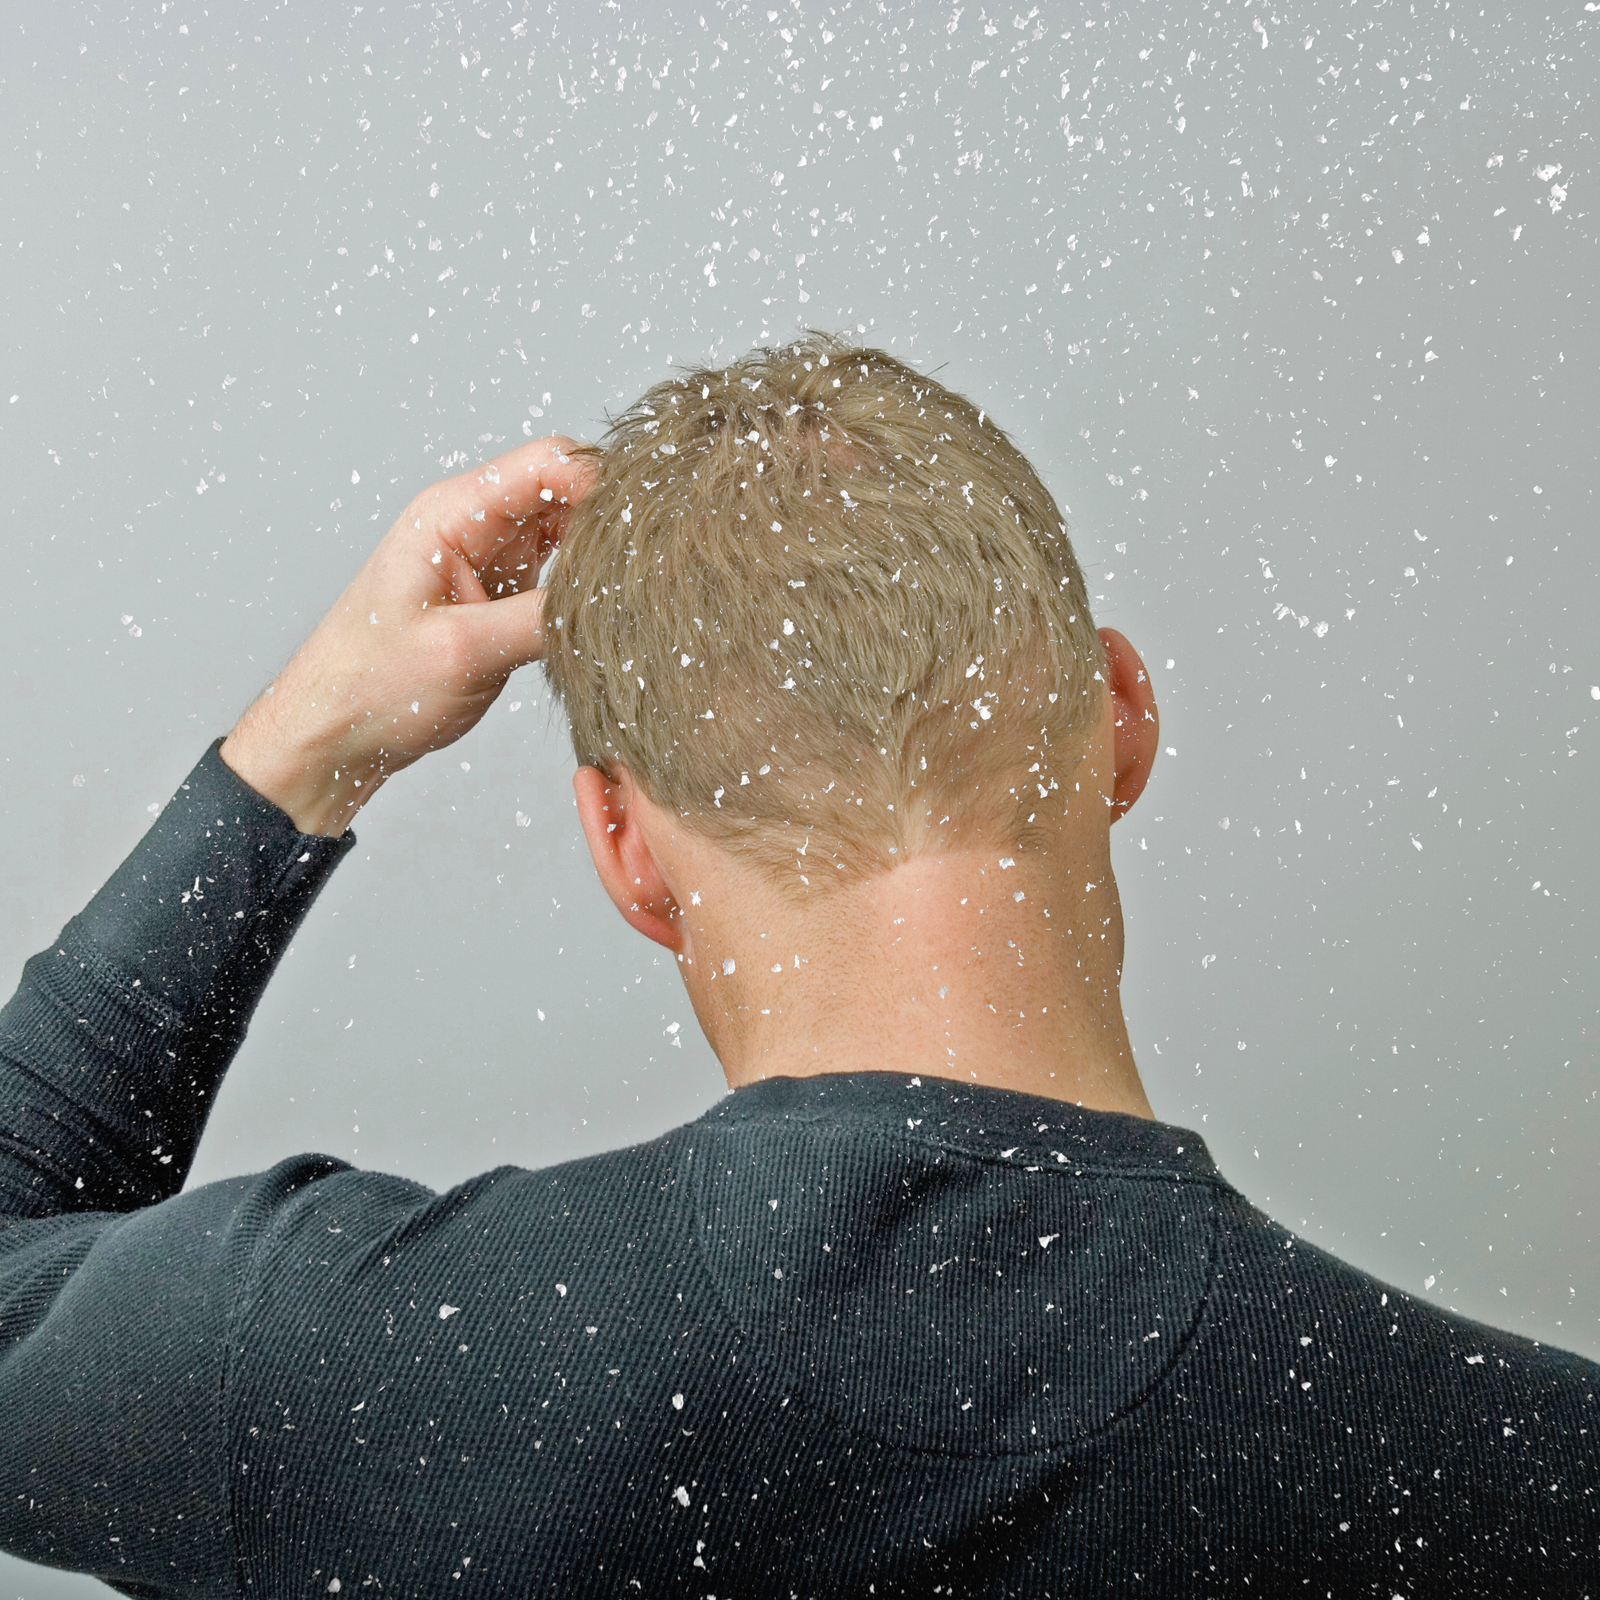 So sorry, this one is about “stress-induced dandruff”